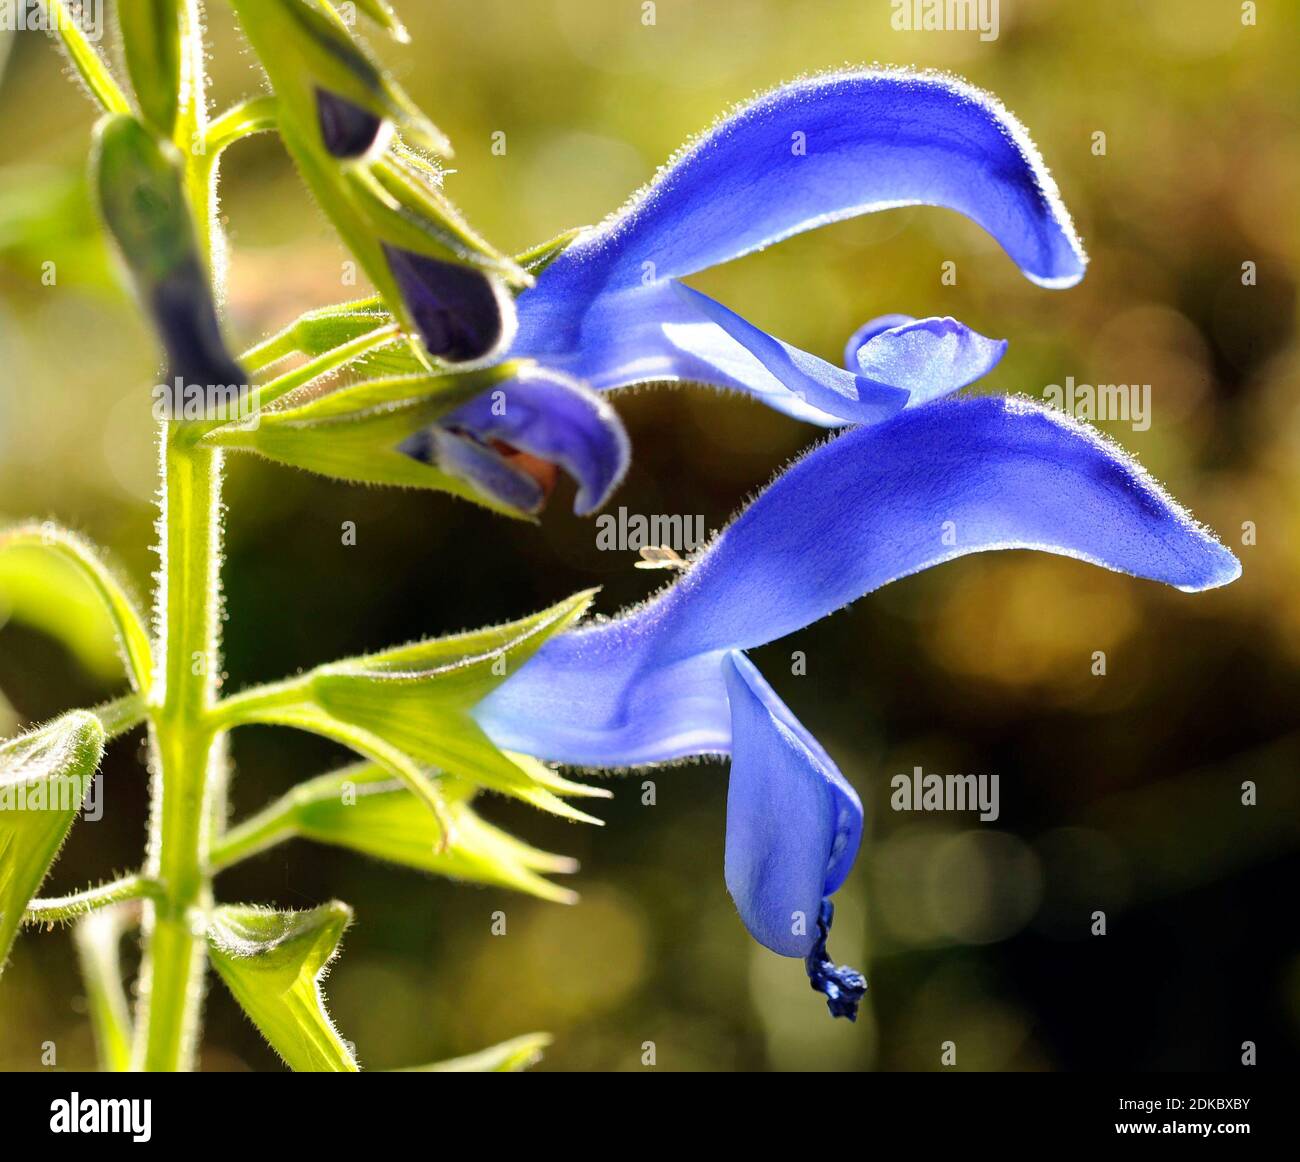 Mexican sage, Salvia patens, also azure sage, garden sage or gentian sage, native to central Mexico Stock Photo